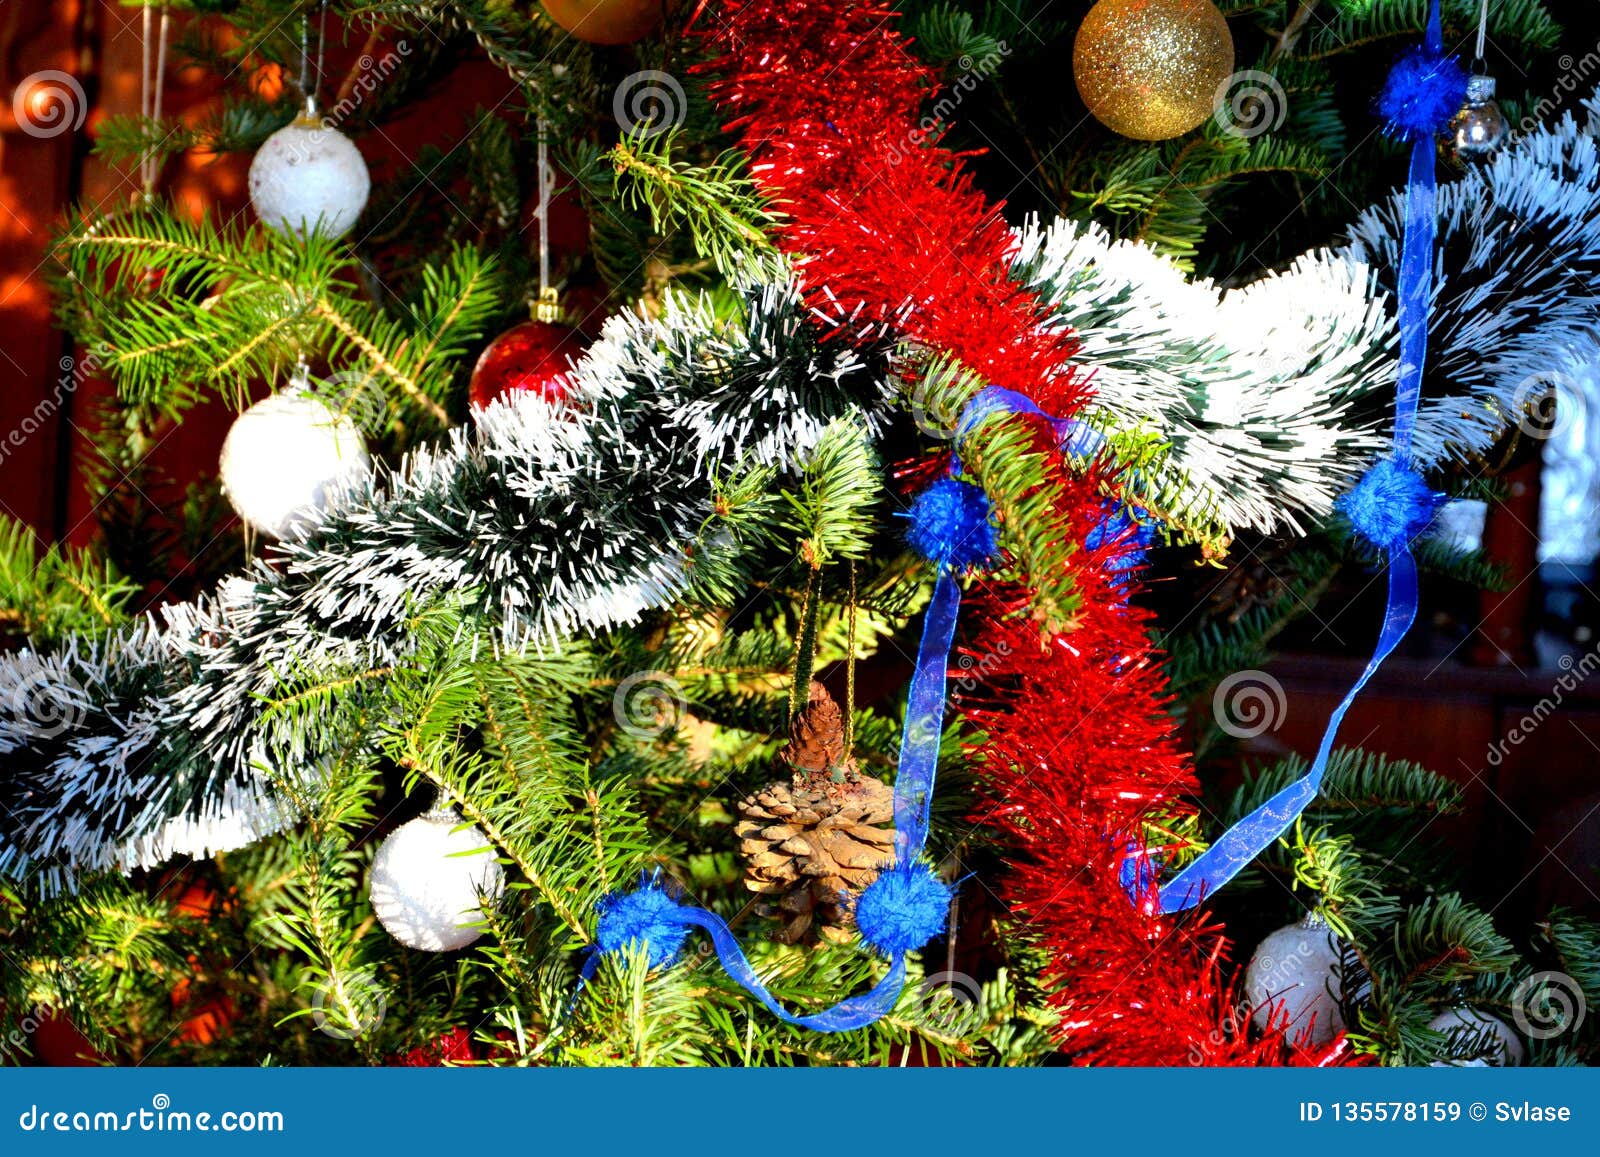 Nice Christmas Tree Ornaments in the Winter Time, for Orthodox ...